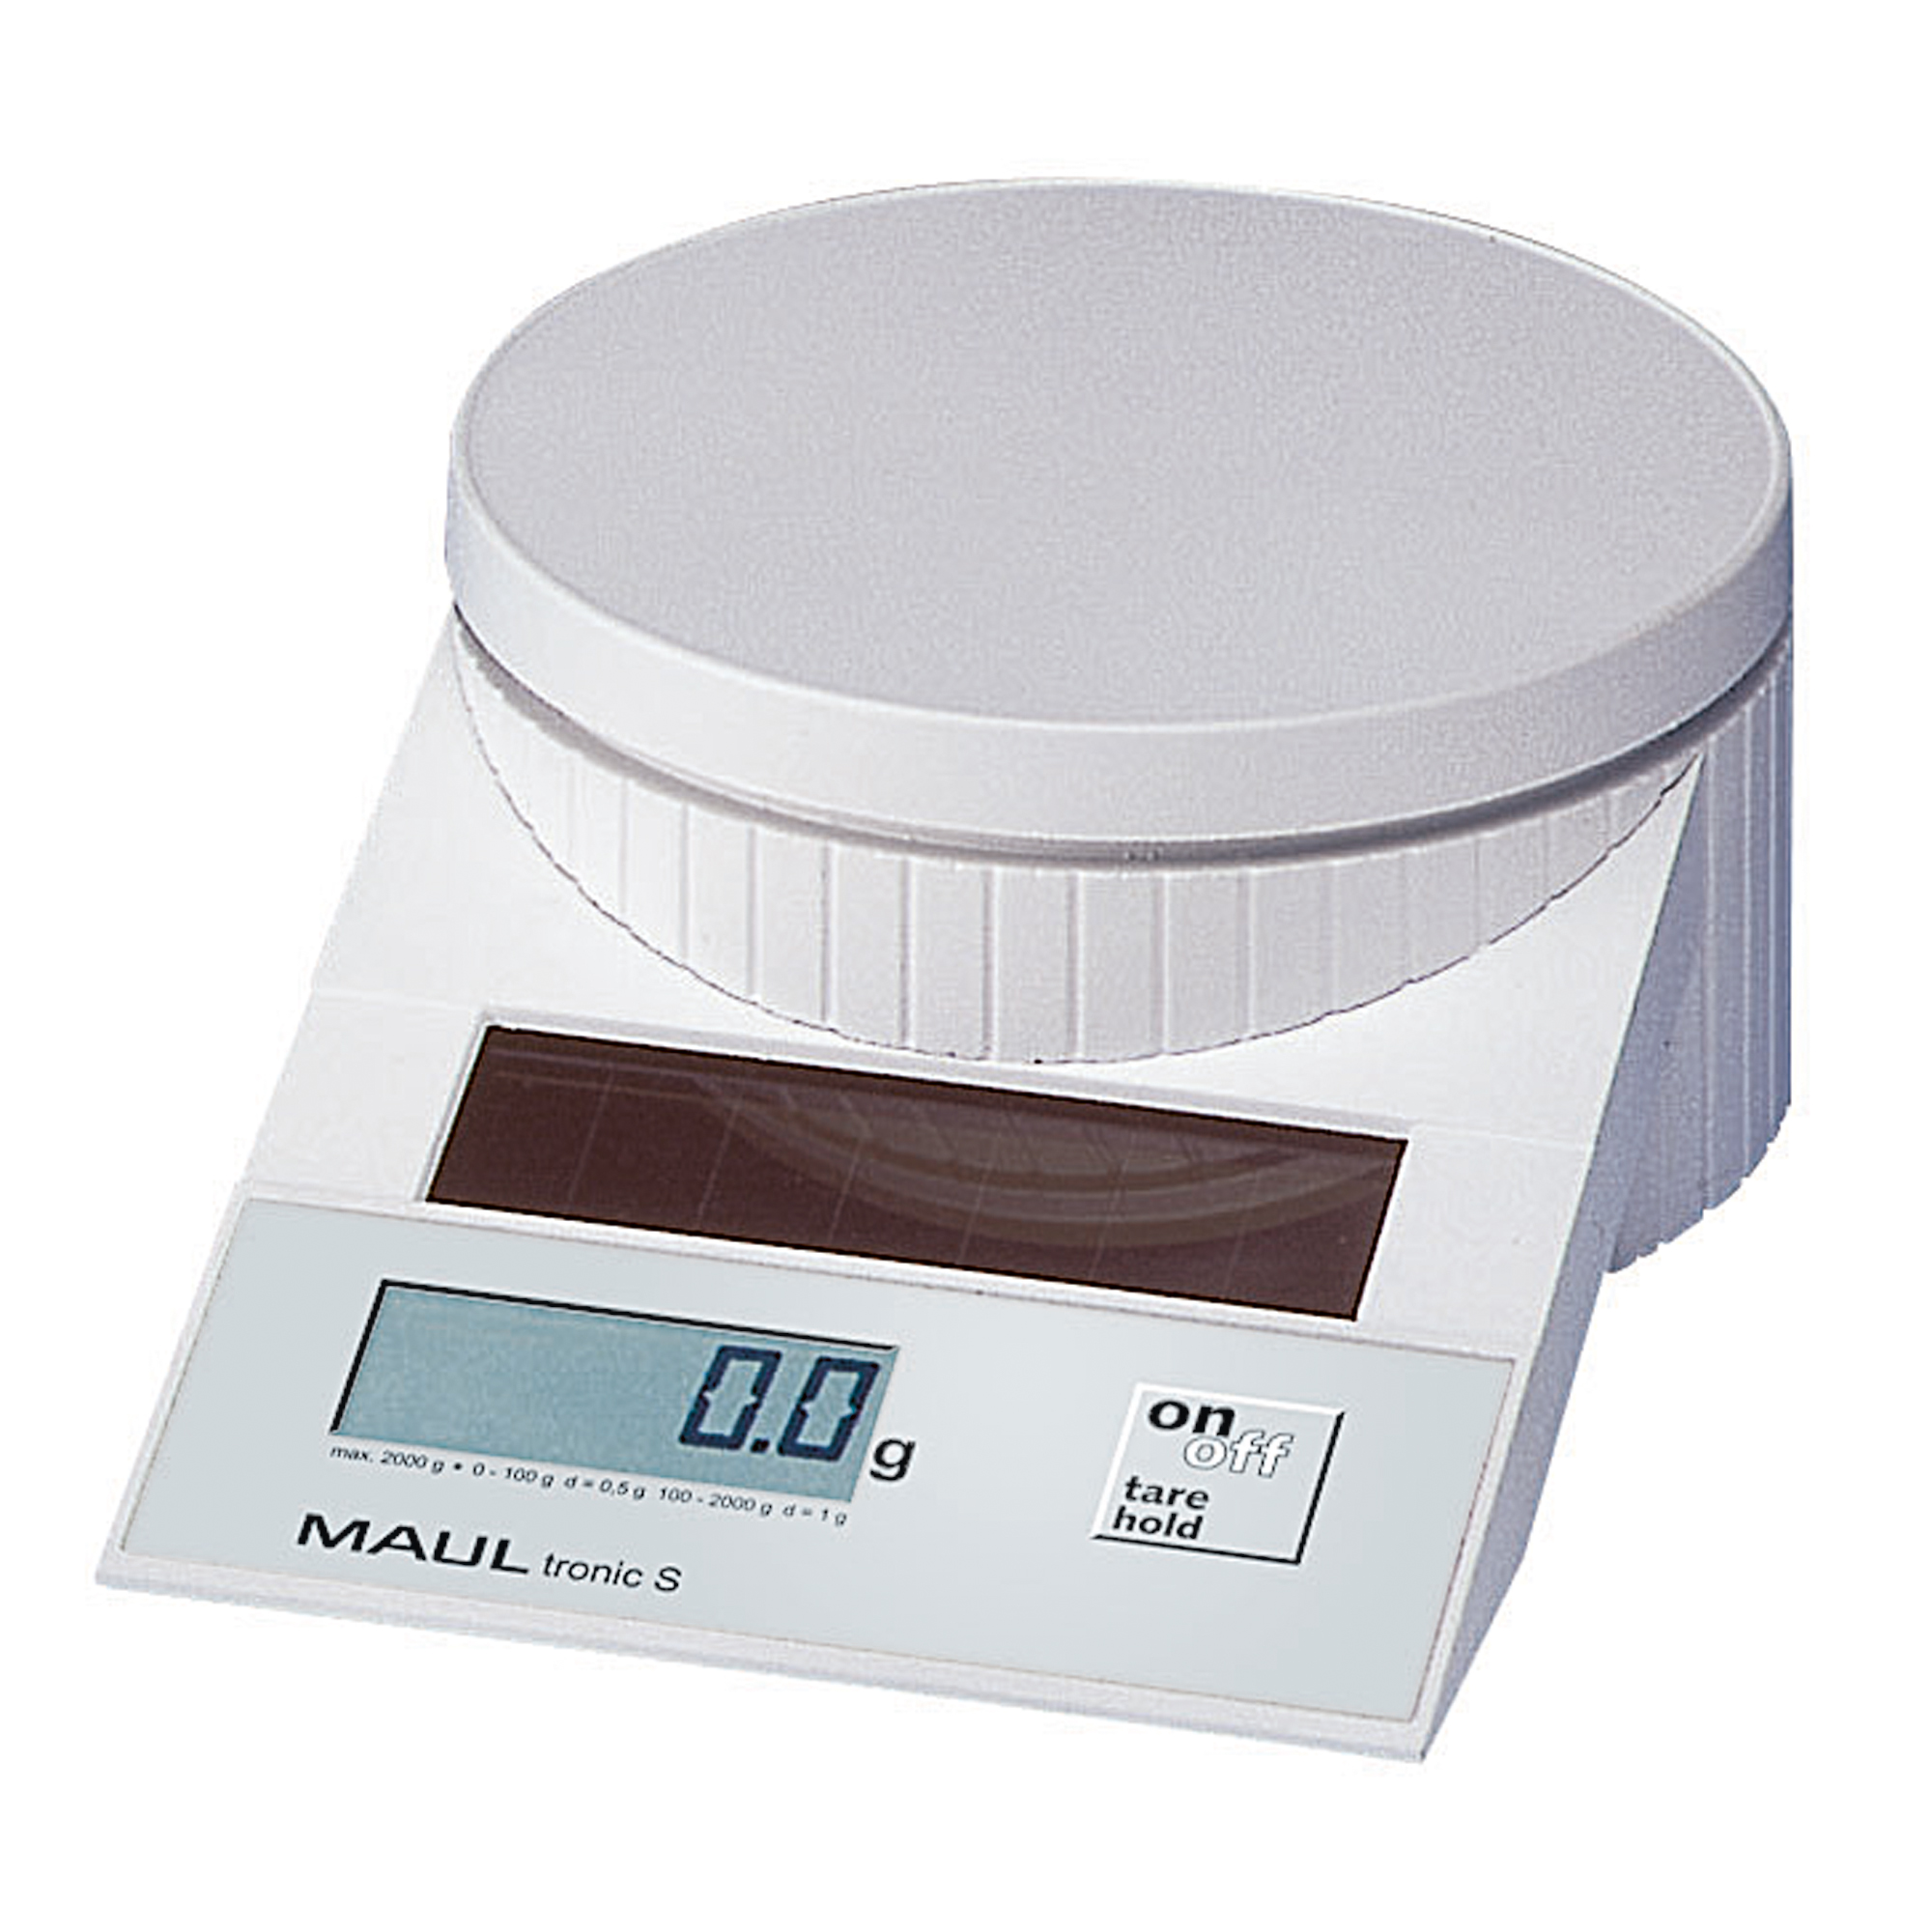 MAUL Briefwaage MAULtronic S 0,5 g (0-100), 1 g (100-2.000)